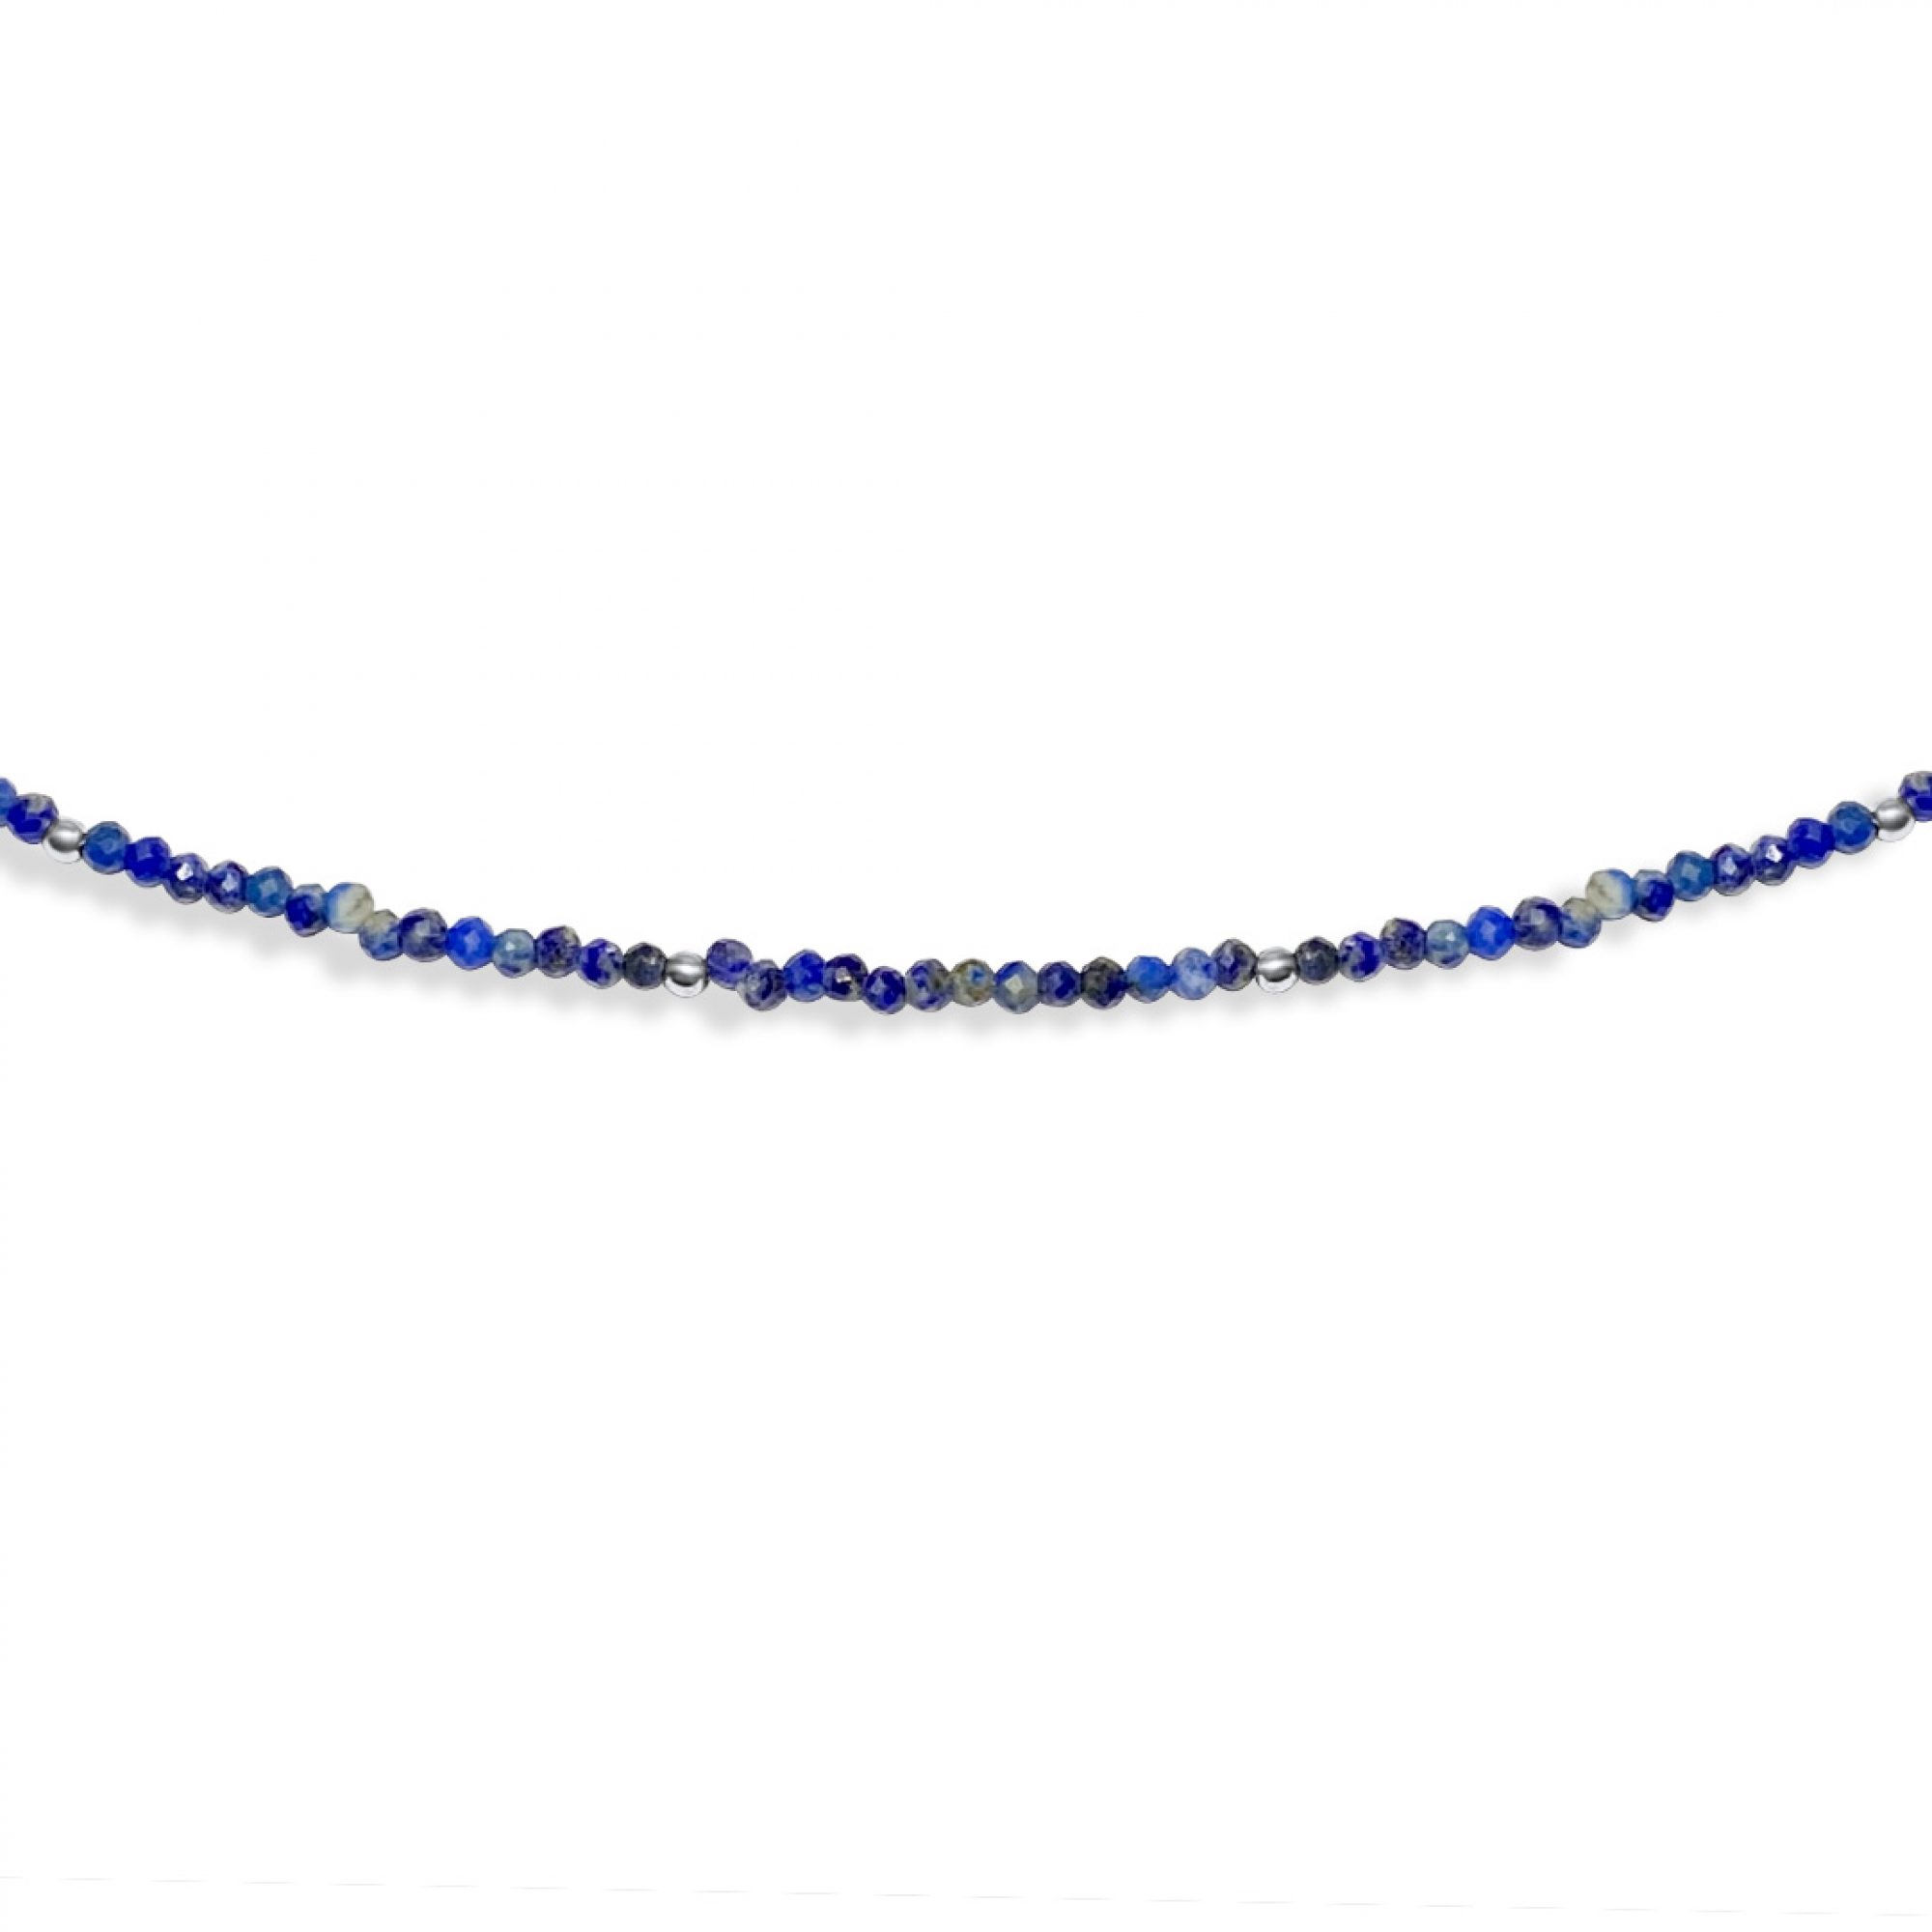 Anklet with lapis lazuli beads